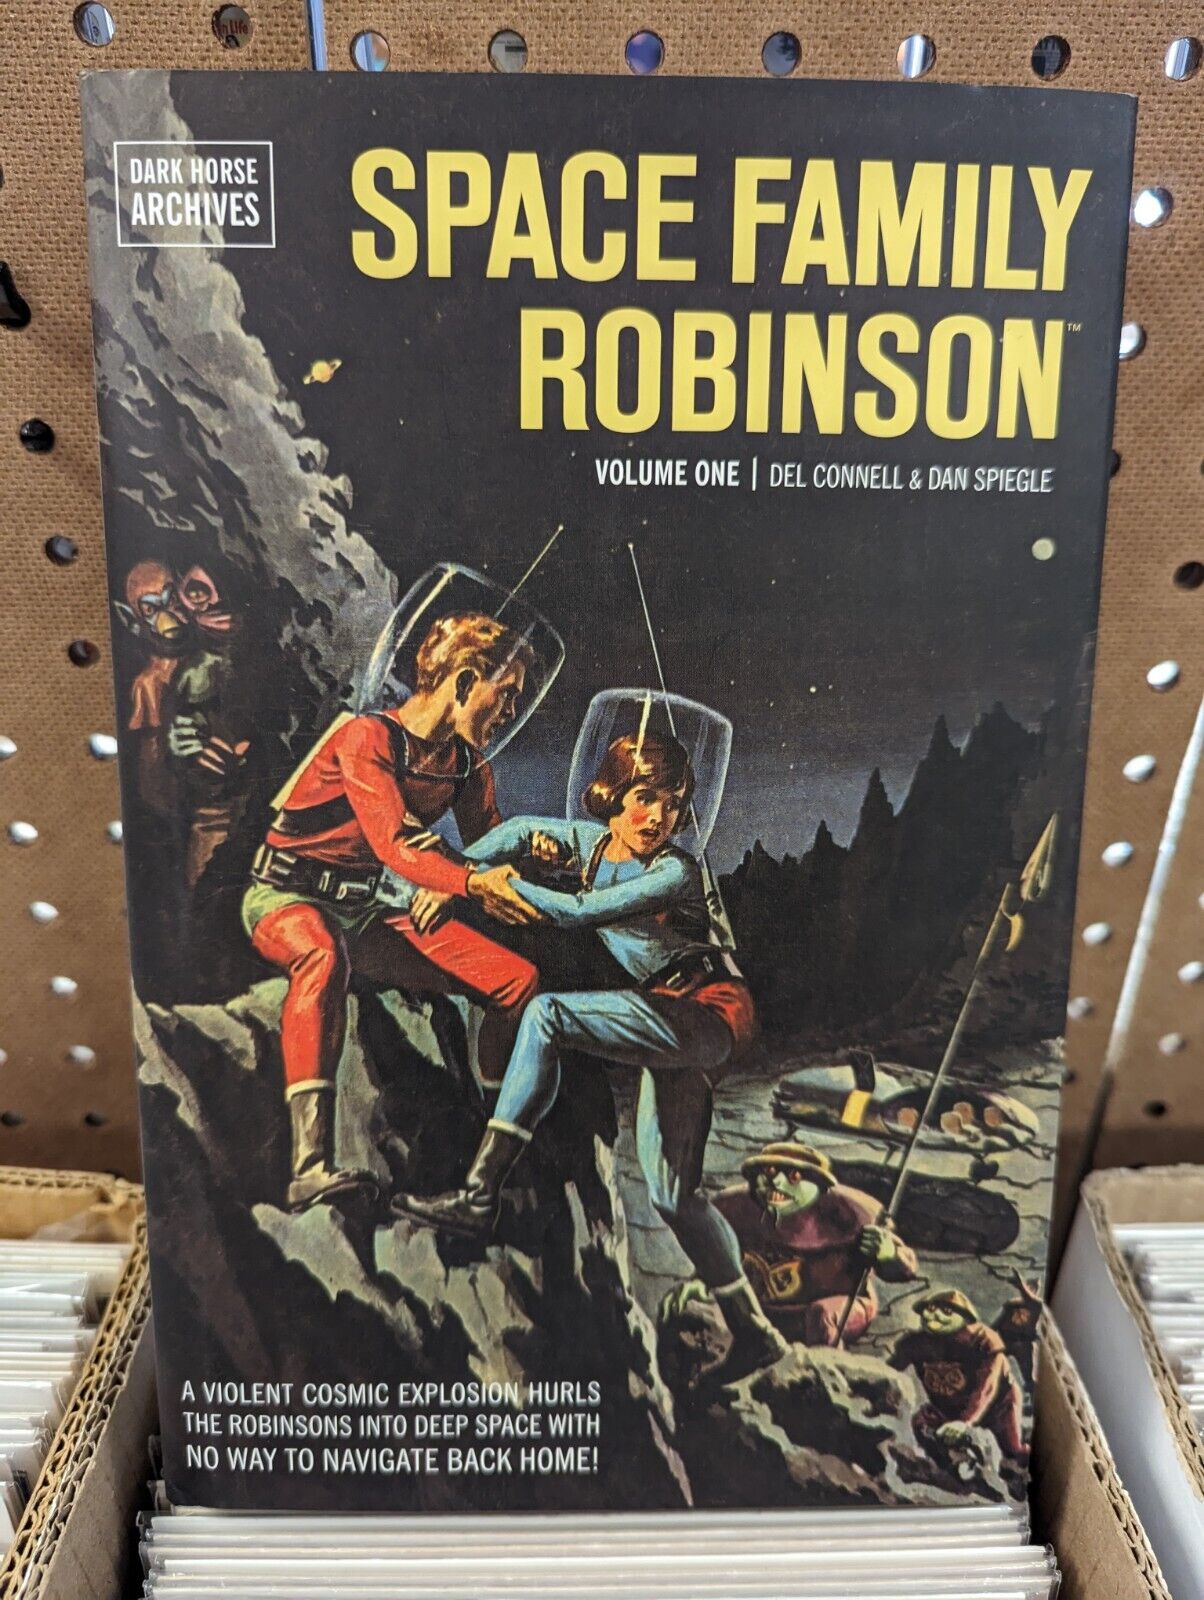 Dark Horse Archives Space Family Robinson Volume One Graphic Novel